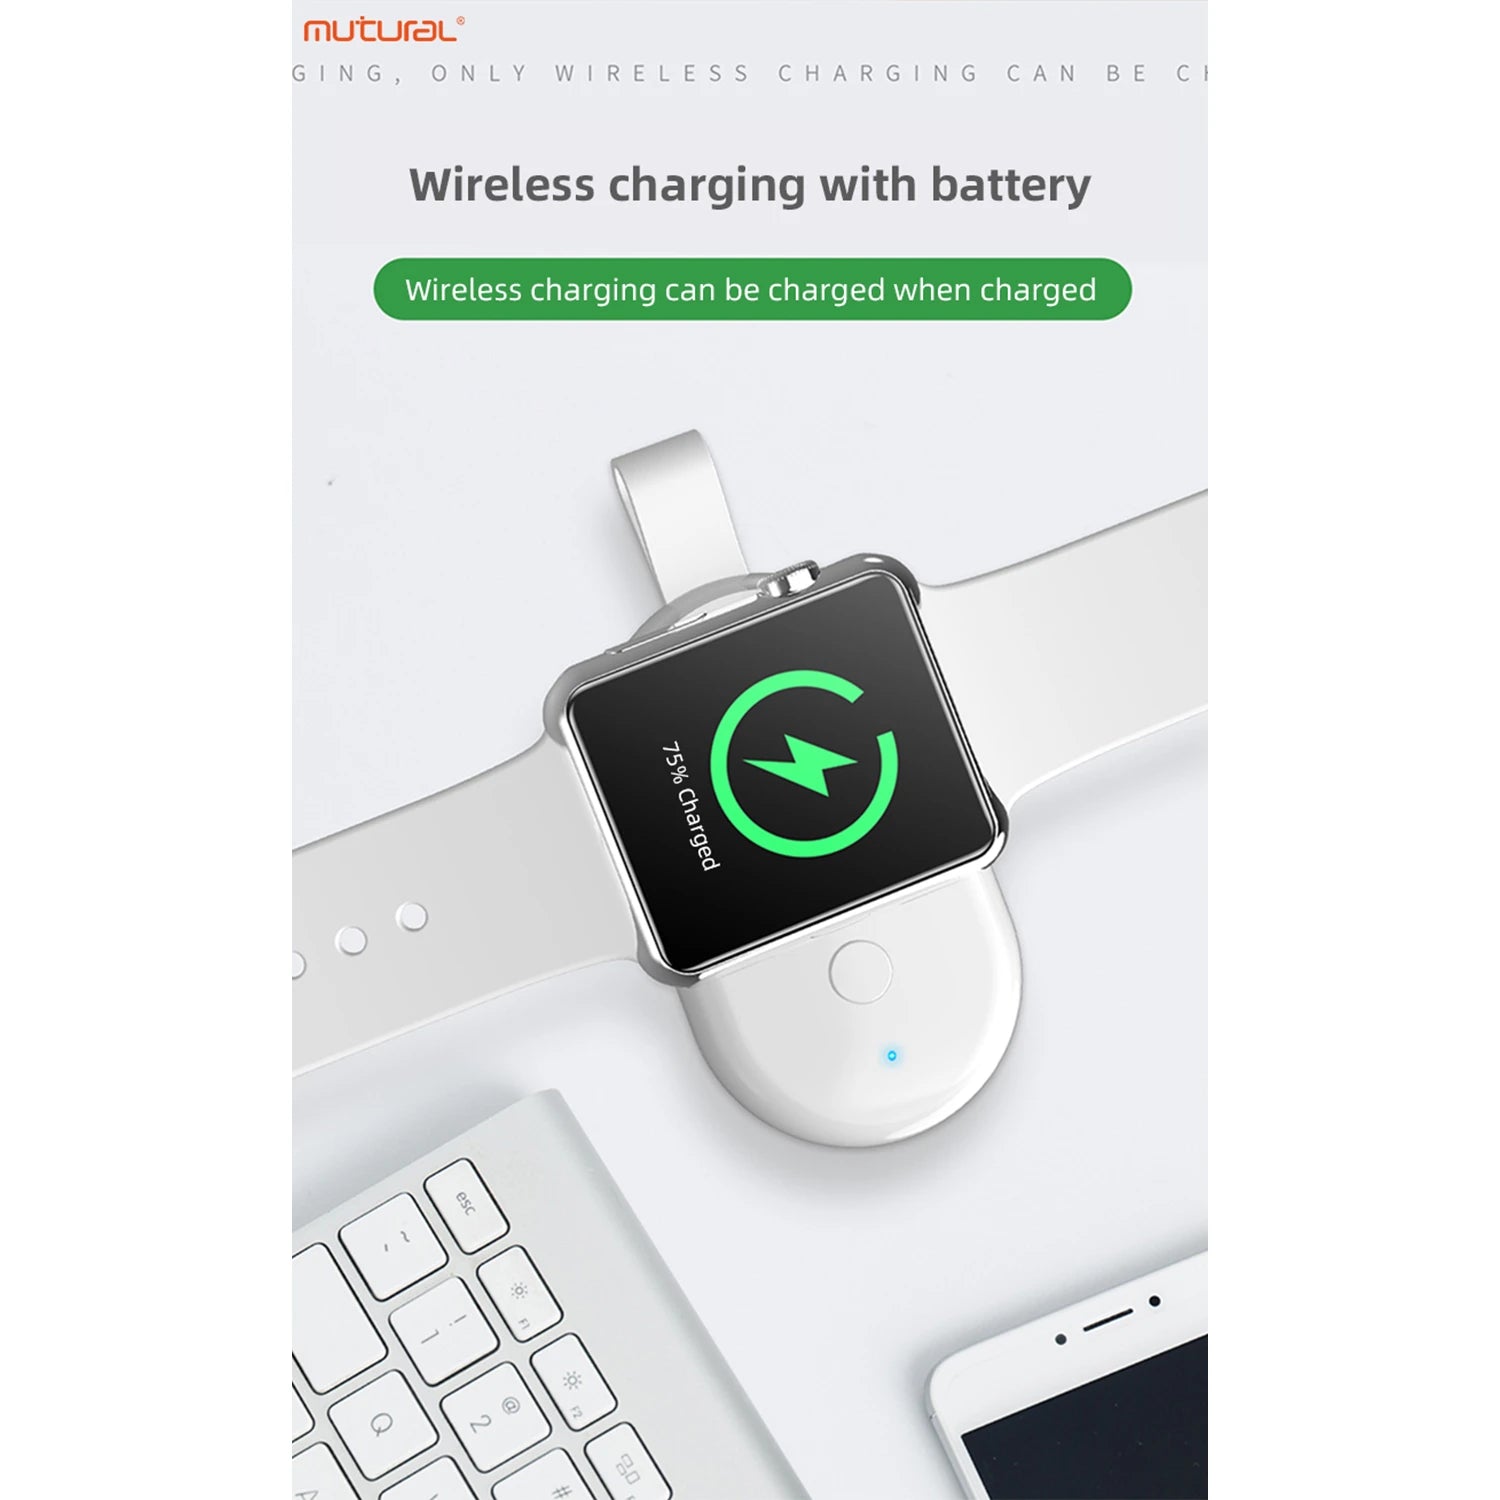 Mutural Apple Watch Charger with 1100mAh Battery, Lightning Input, White